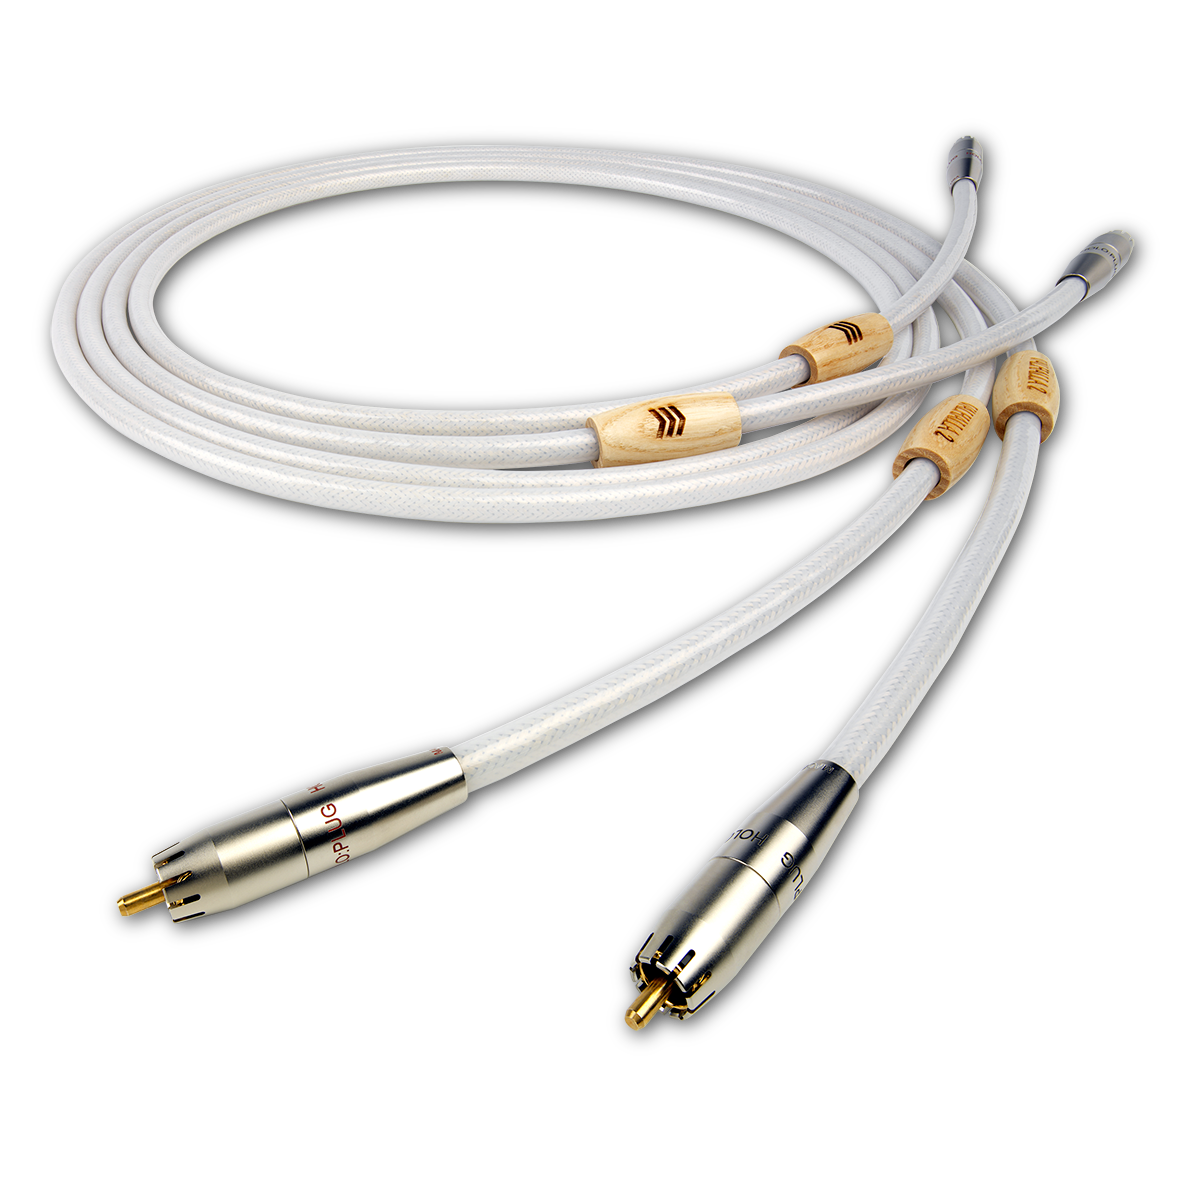 Nordost Valhalla 2 Analog Interconnects (available to demo)